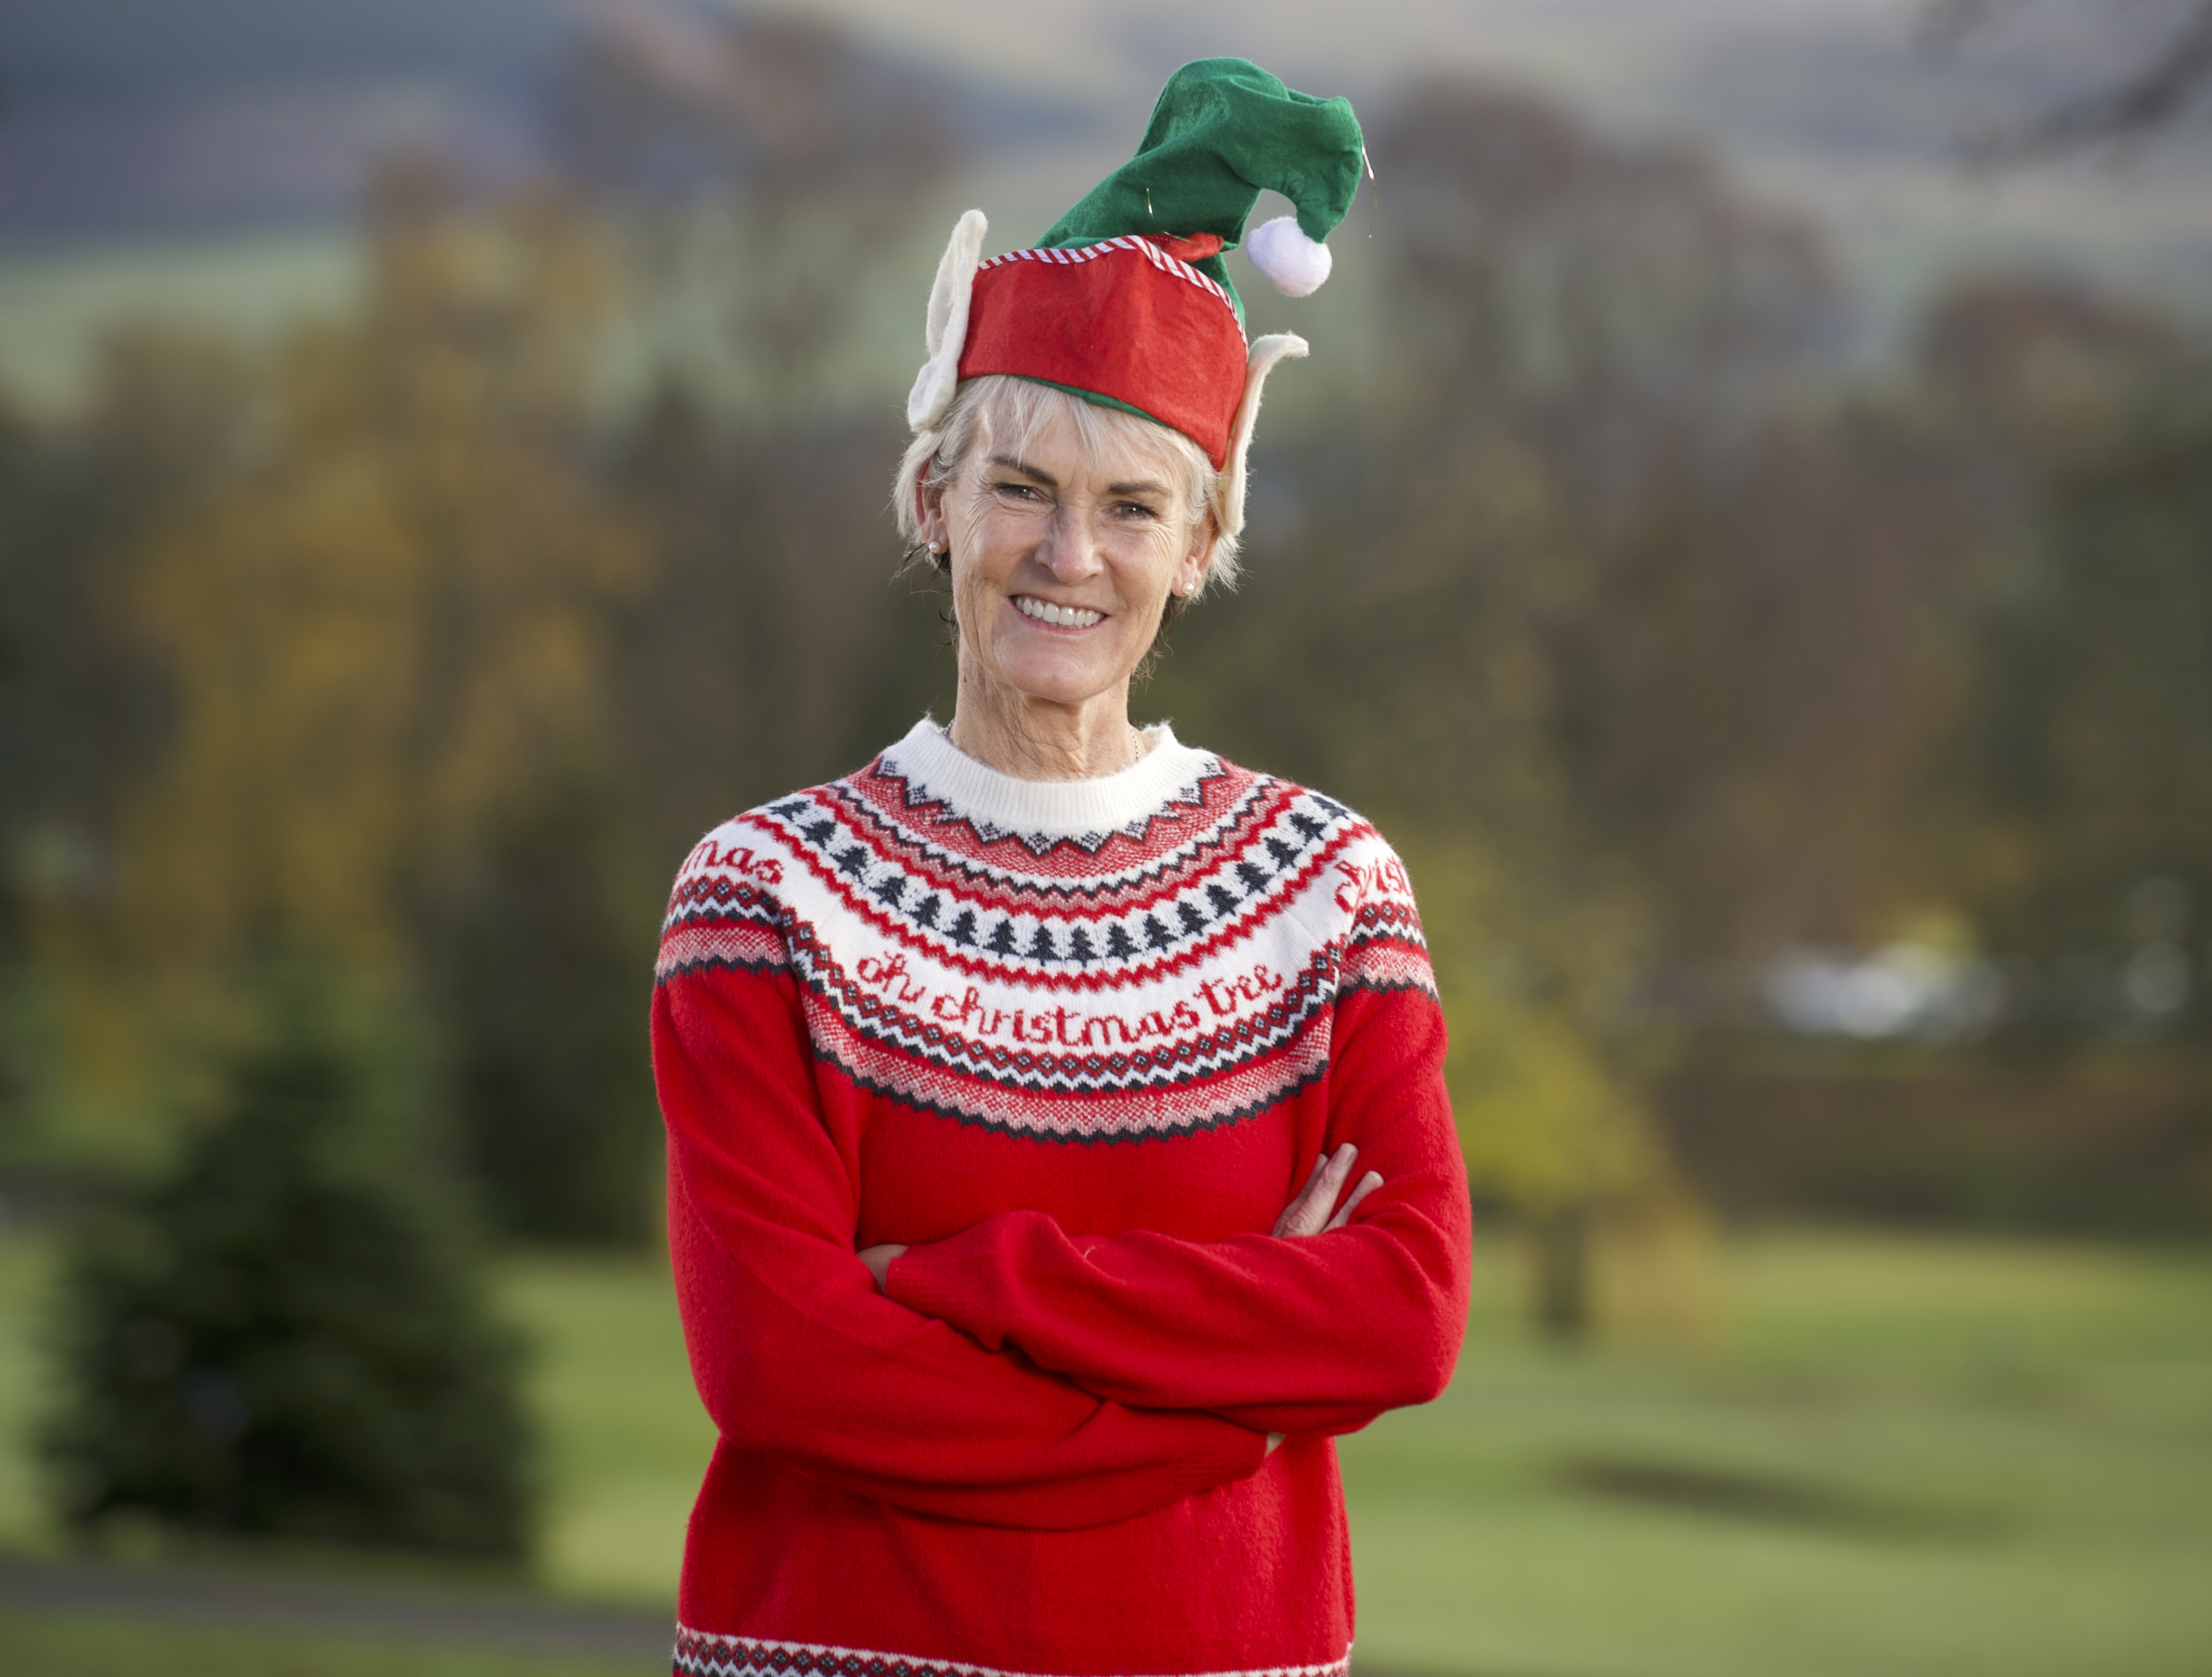 Judy Murray's support for the charity is "elf-explanatory"